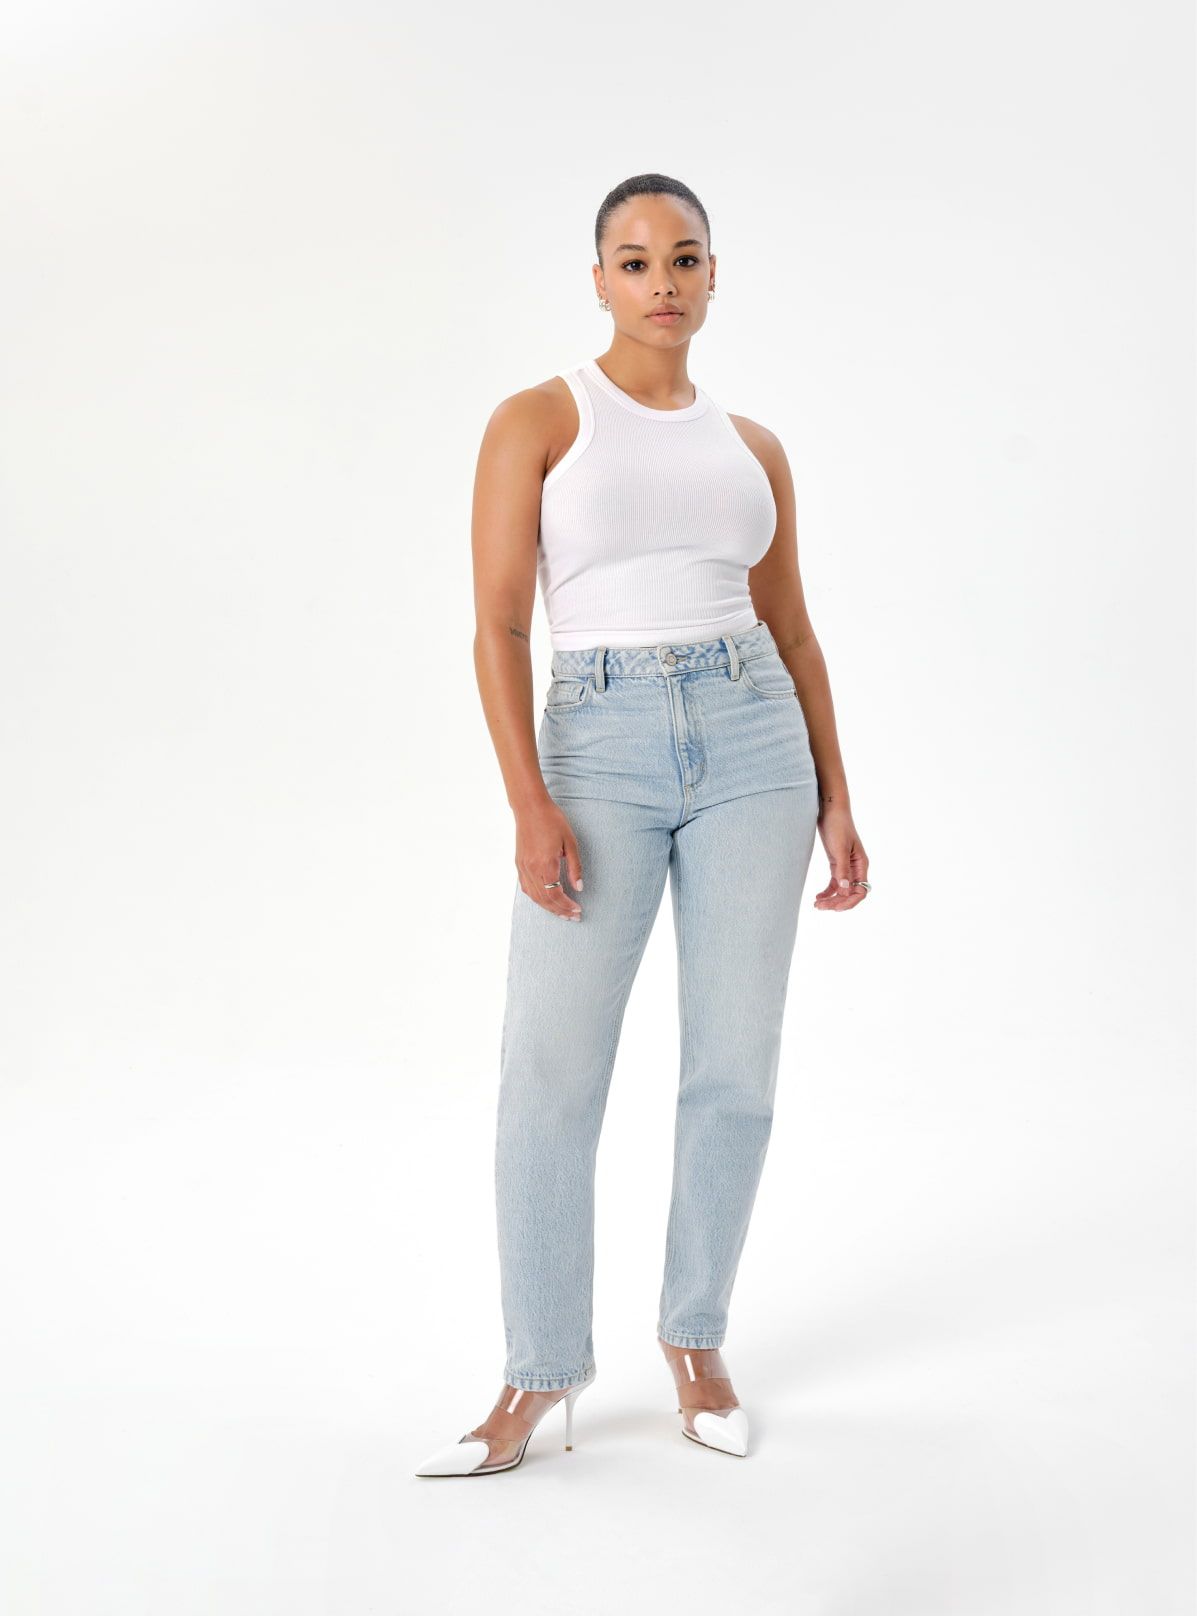 A model wears light blue mom jeans and a white racertank.